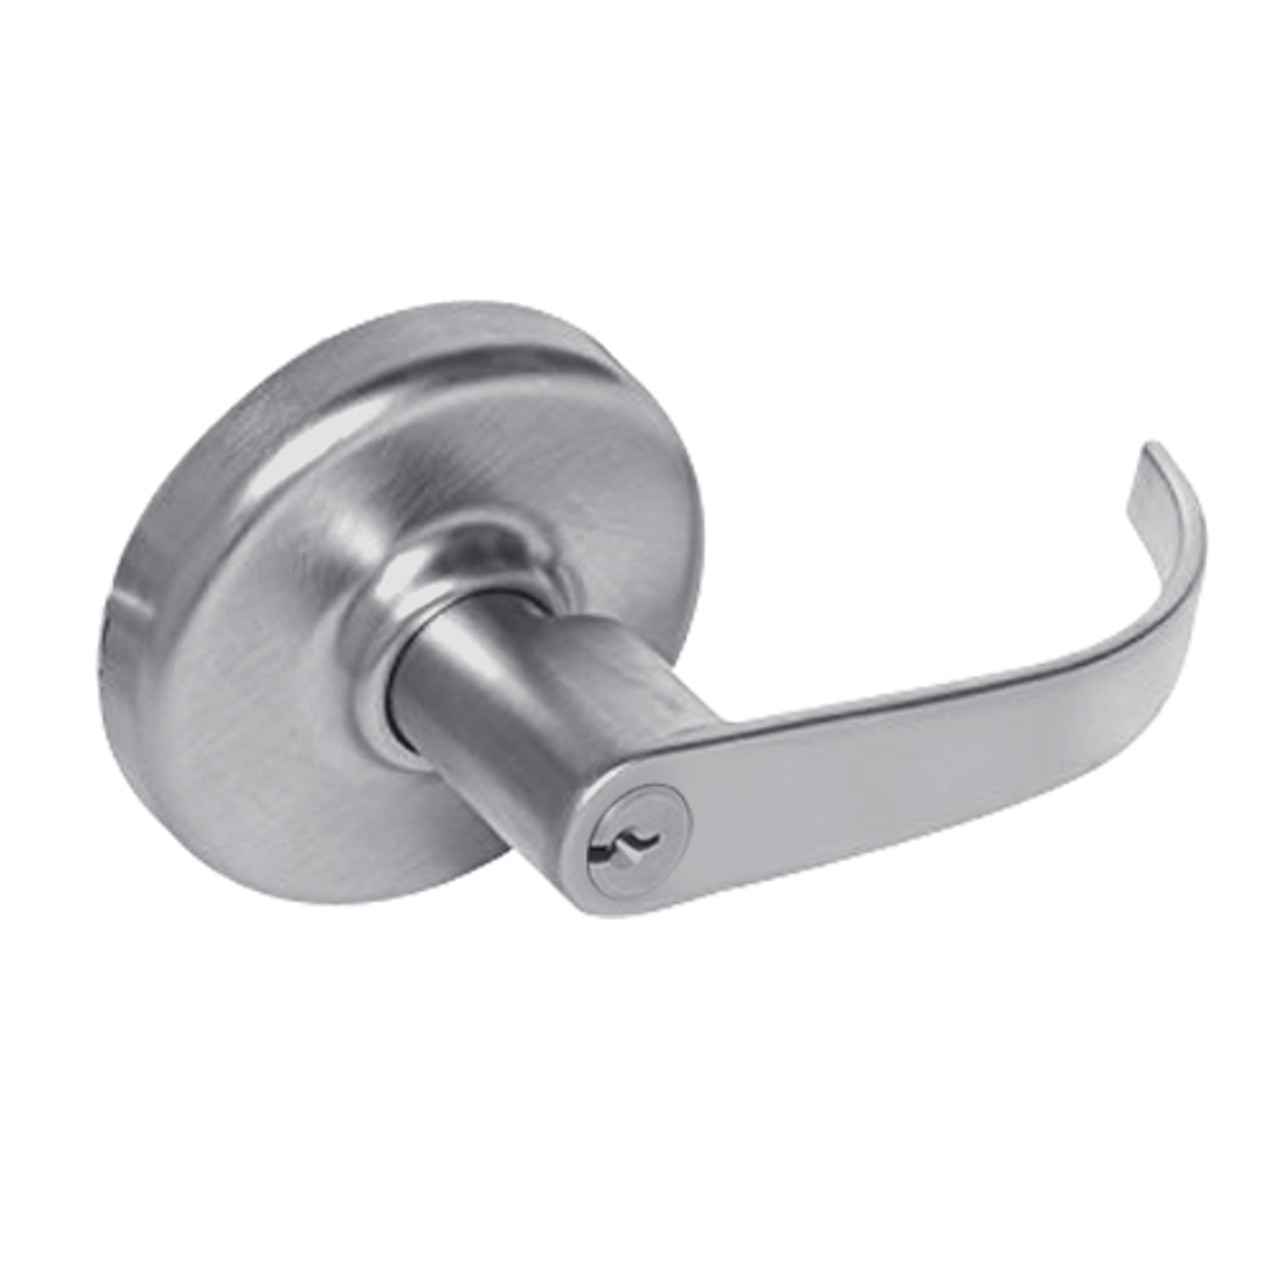 CL3355-PZD-626 Corbin CL3300 Series Extra Heavy Duty Classroom Cylindrical Locksets with Princeton Lever in Satin Chrome Finish